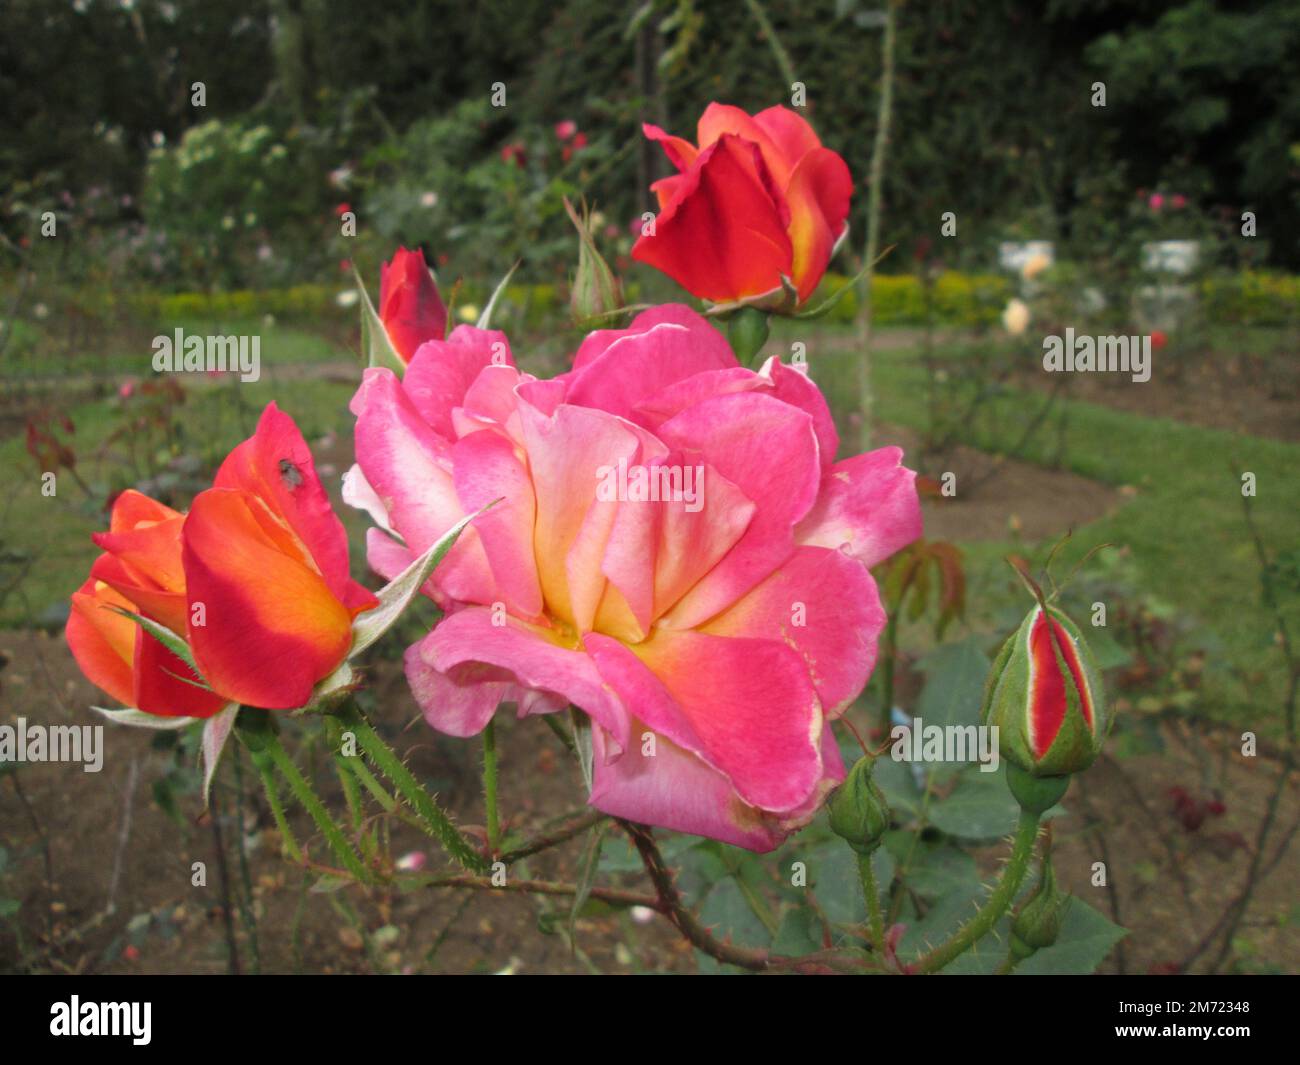 Fresh,beauty,natural Rose flowers Stock Photo